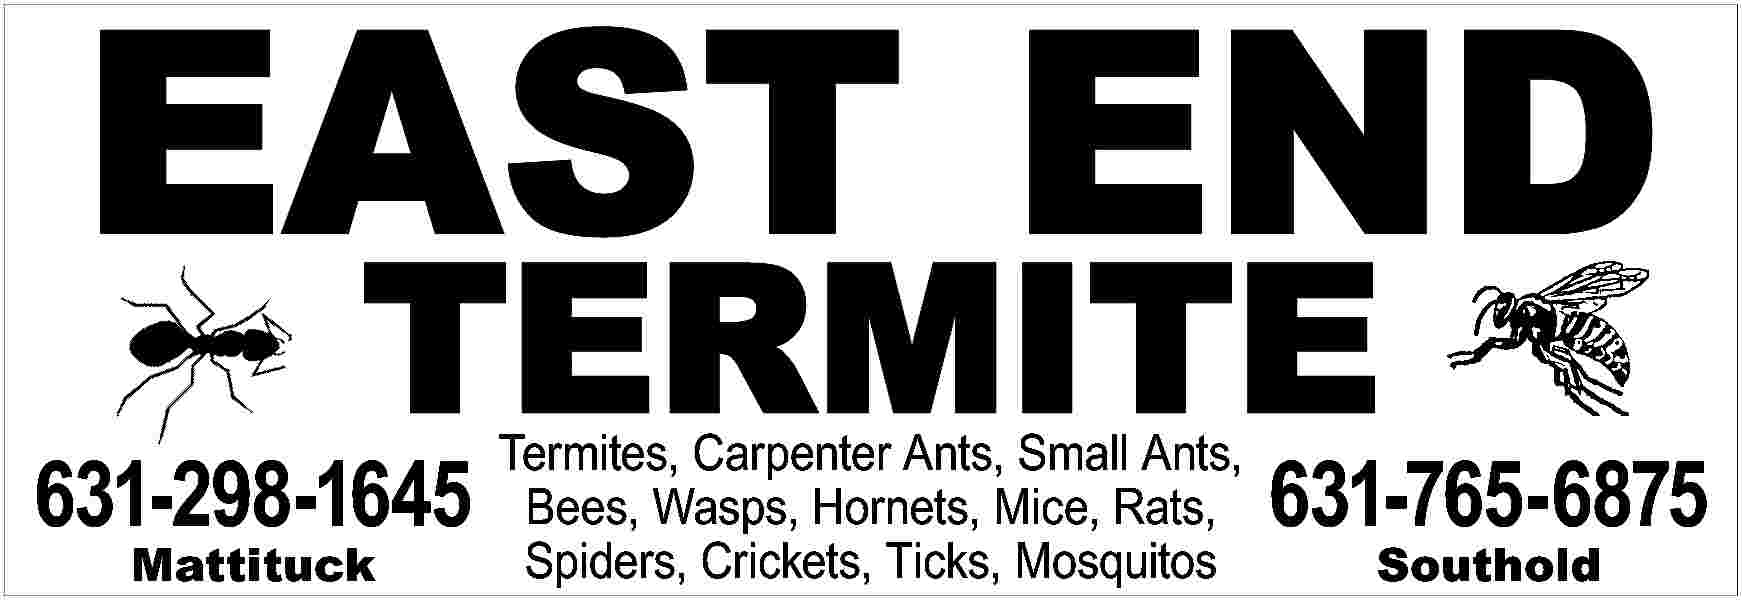 EAST END <br>TERMITE <br> <br>631-298-1645  EAST END  TERMITE    631-298-1645  Mattituck    Termites, Carpenter Ants, Small Ants,  Bees, Wasps, Hornets, Mice, Rats,  Spiders, Crickets, Ticks, Mosquitos    631-765-6875  Southold     